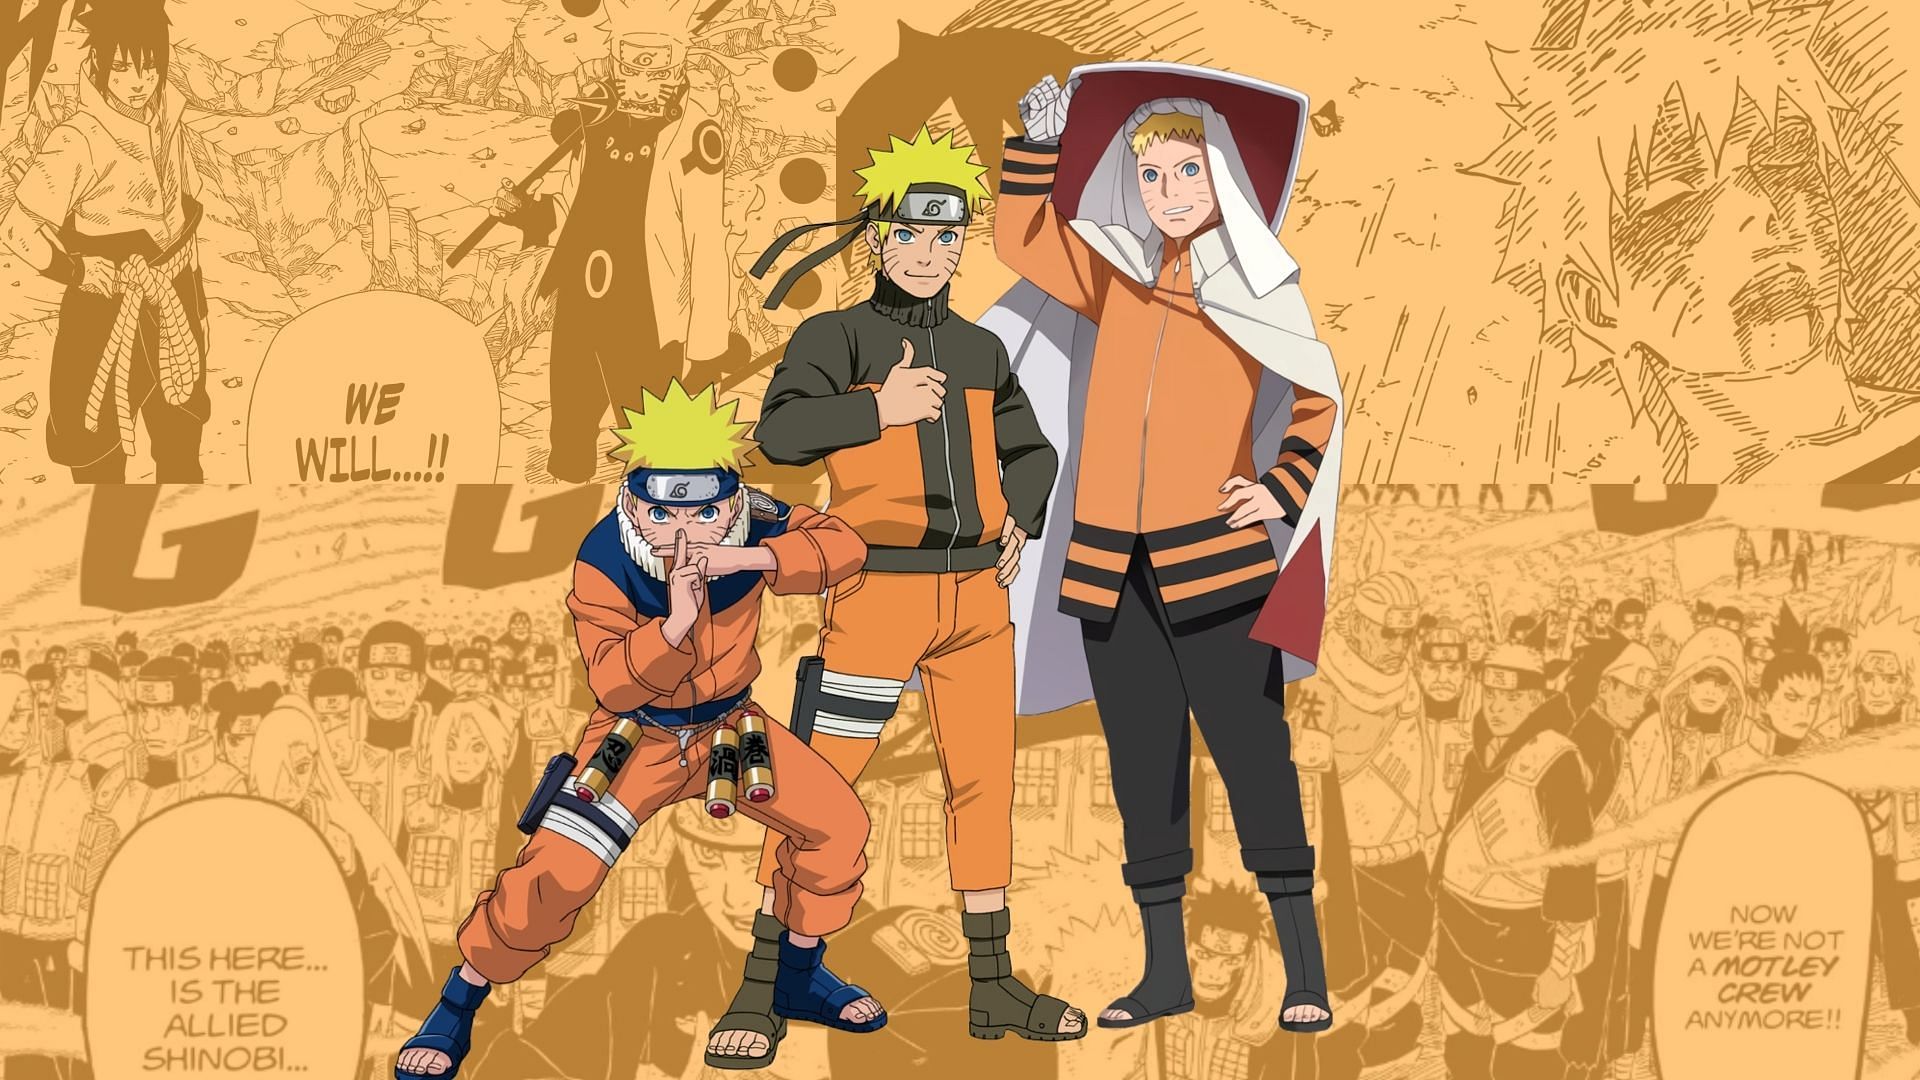 Naruto's 20th Anniversary Promo Reveals What an Anime Reboot Could Look Like